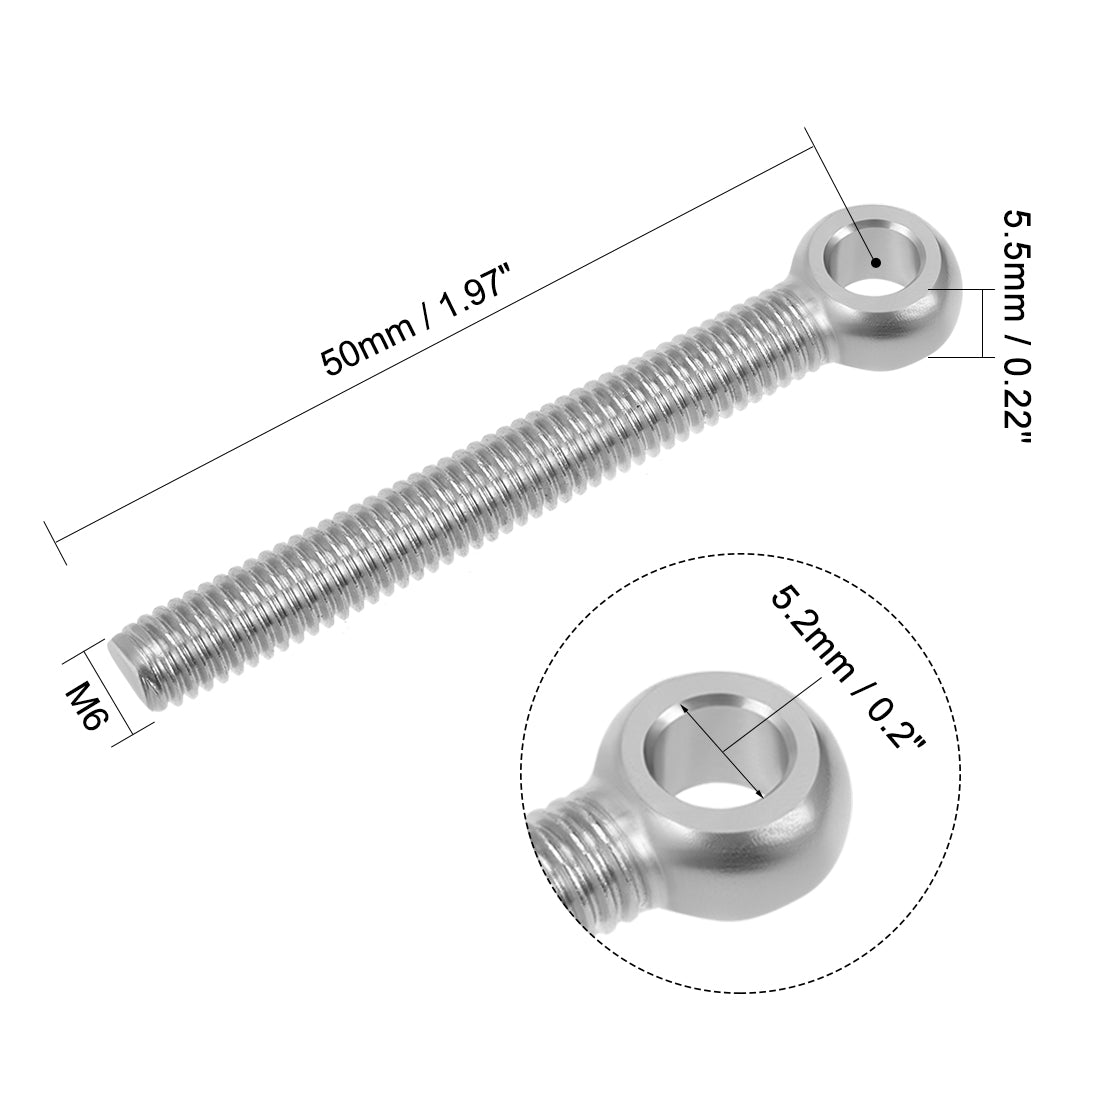 uxcell Uxcell M6 x 50mm Machinery Shoulder Swing Lifting Eye Bolt 304 Stainless Steel Metric Thread 4pcs